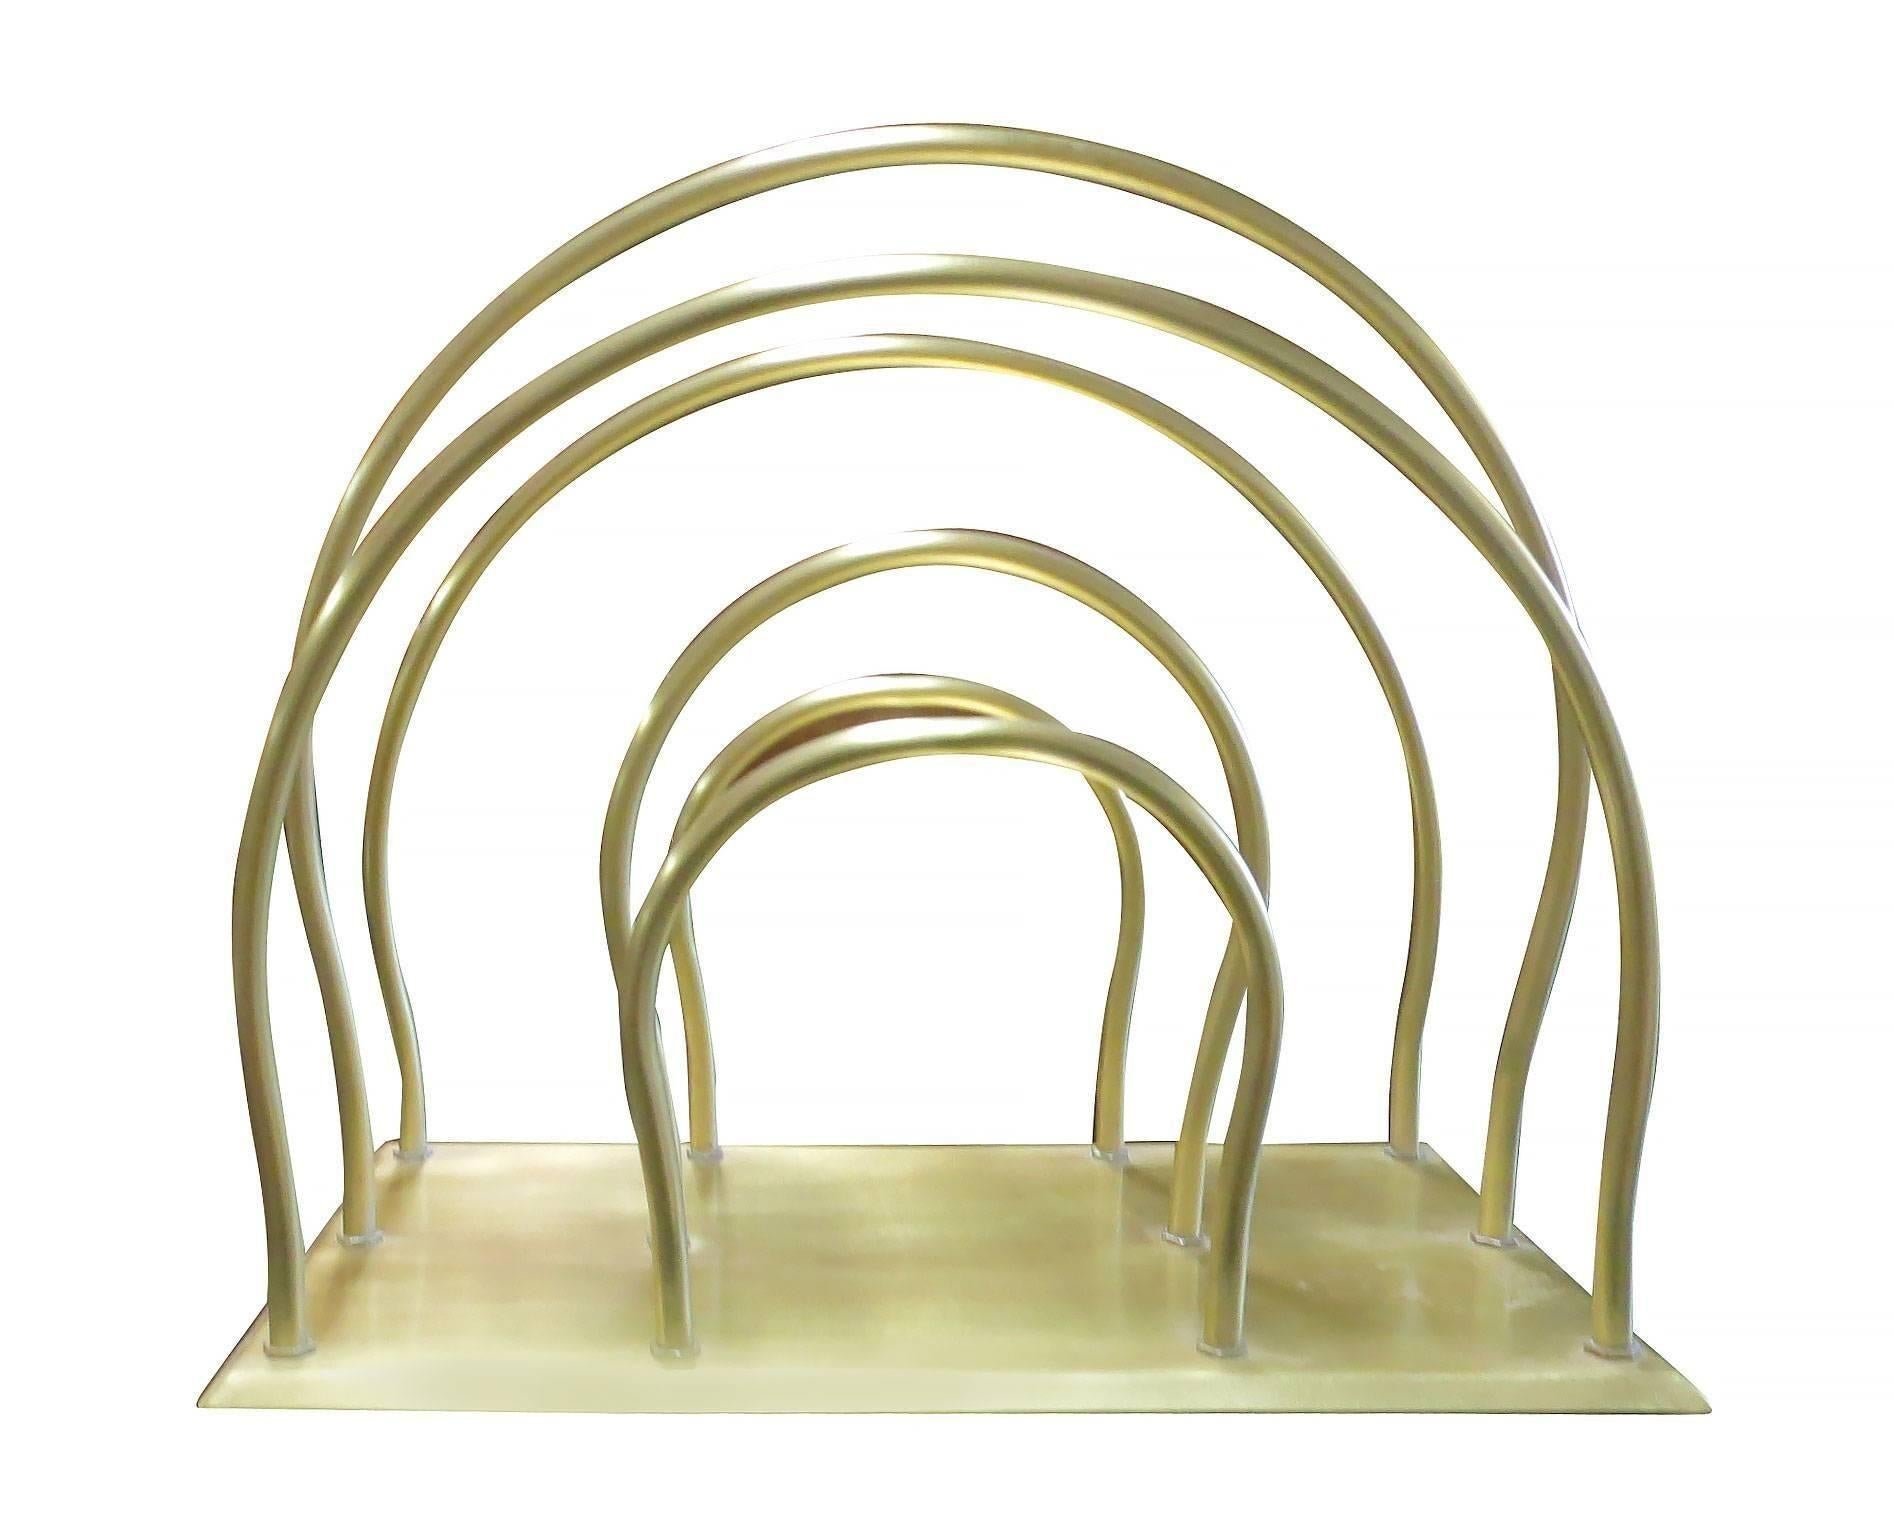 Solid brass Art Moderne magazine rack featuring Streamline style with a square base and three dividers made of six tubular 